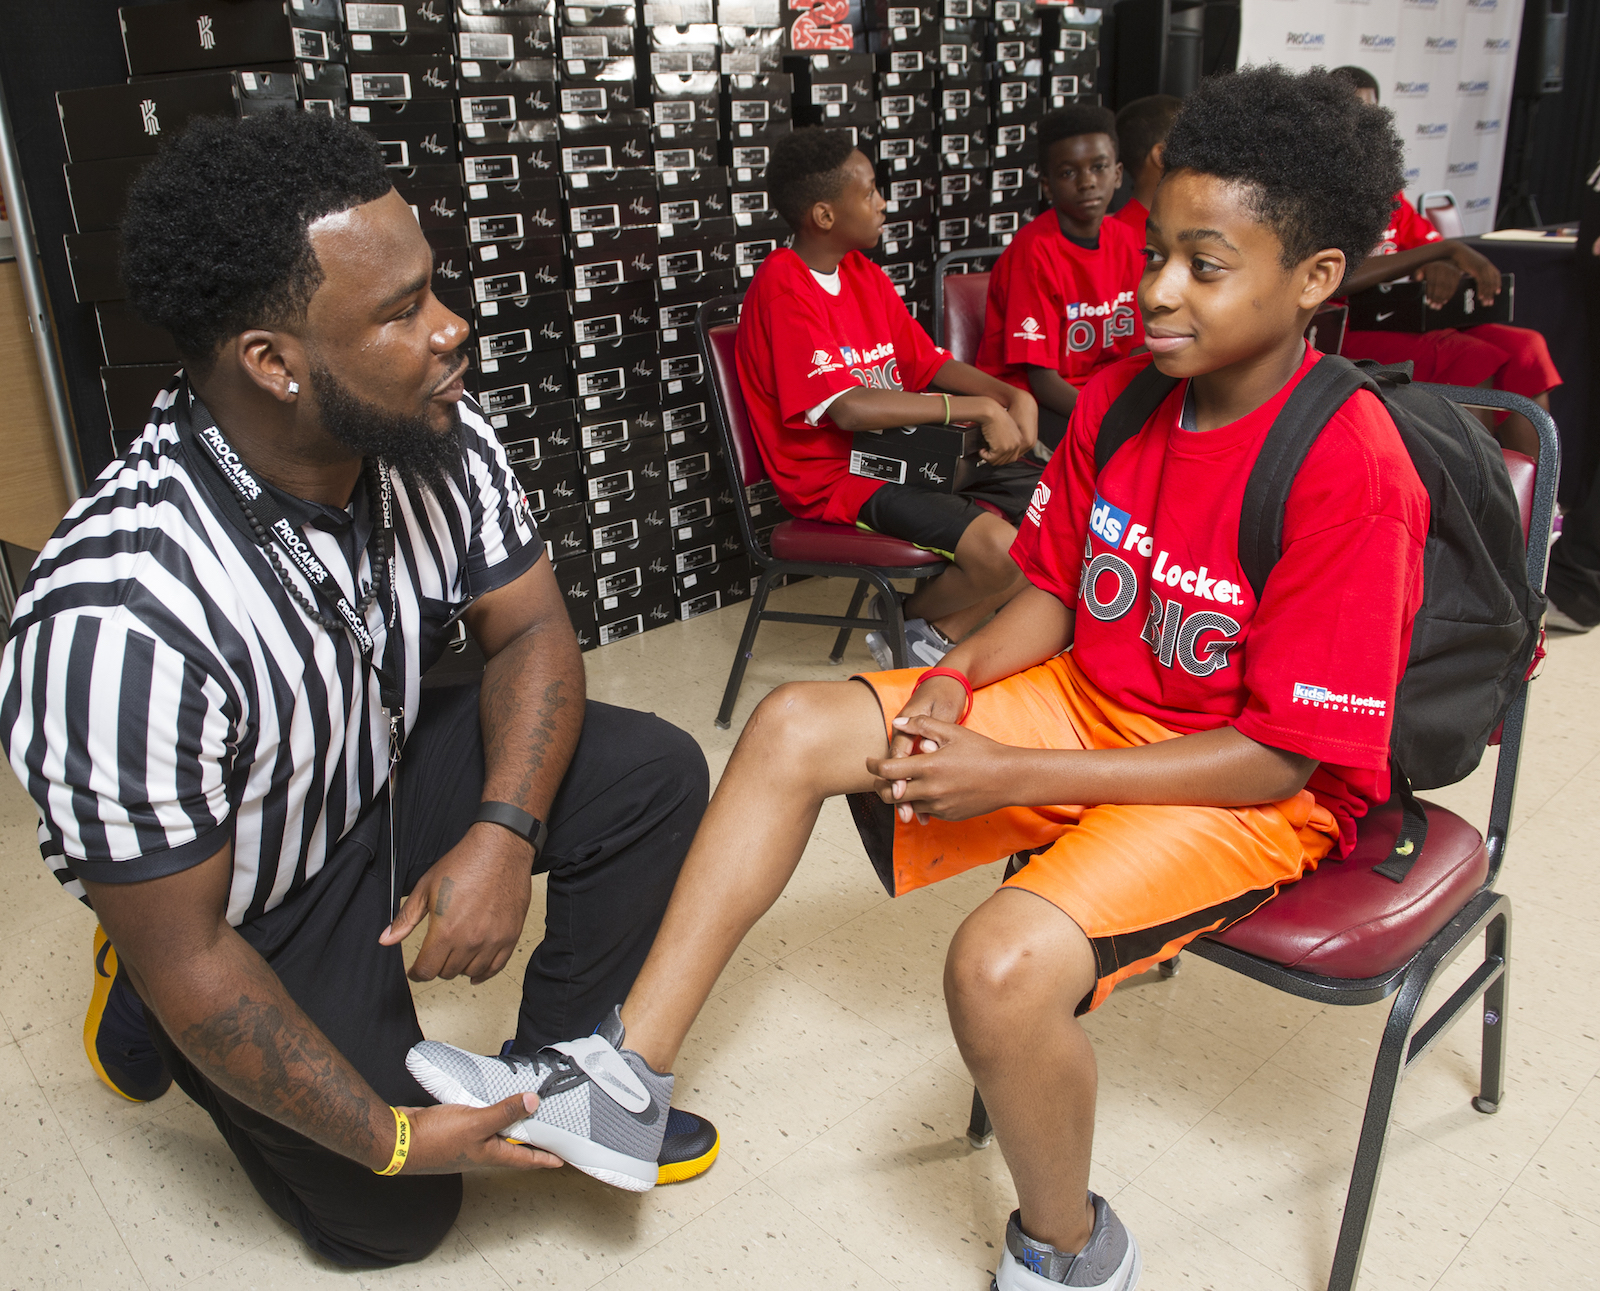 Kids Foot Locker striper Javon Hampton helps Ameer Holman, 11, of Cleveland, fit his Nike Kyrie II signature  shoes, Saturday, July 9, 2016, in Independence, Ohio. Kids Foot Locker donated 190 pairs of sneakers to Boys & Girls Clubs of Cleveland, to match Cleveland Cavaliers star Kyrie Irving's 190 points scored during the NBA championship series.  (Phil Long/AP Images for Kids Foot Locker)